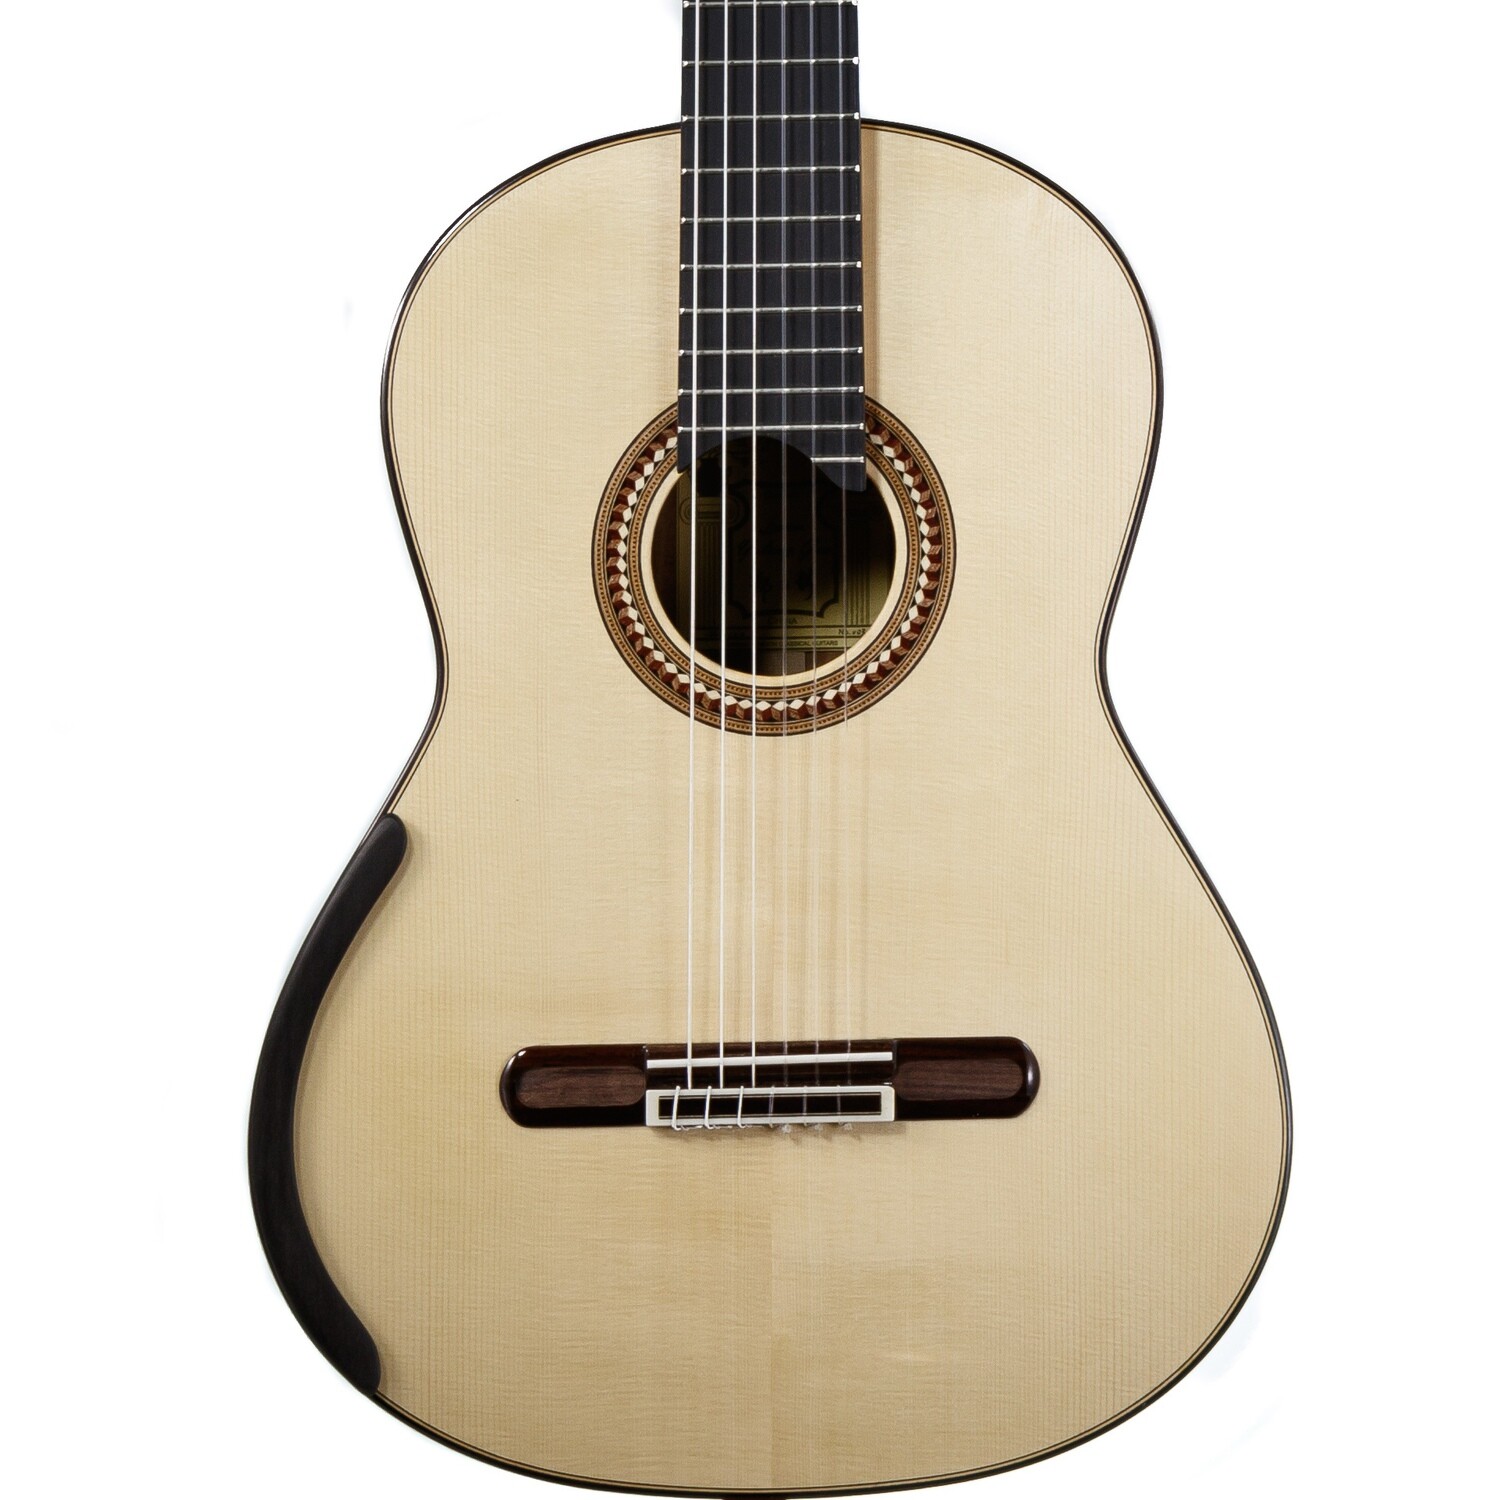 Yulong Guo Concert Model - Spruce Double Top, solid Koa Back/Sides - 650mm Scale Length